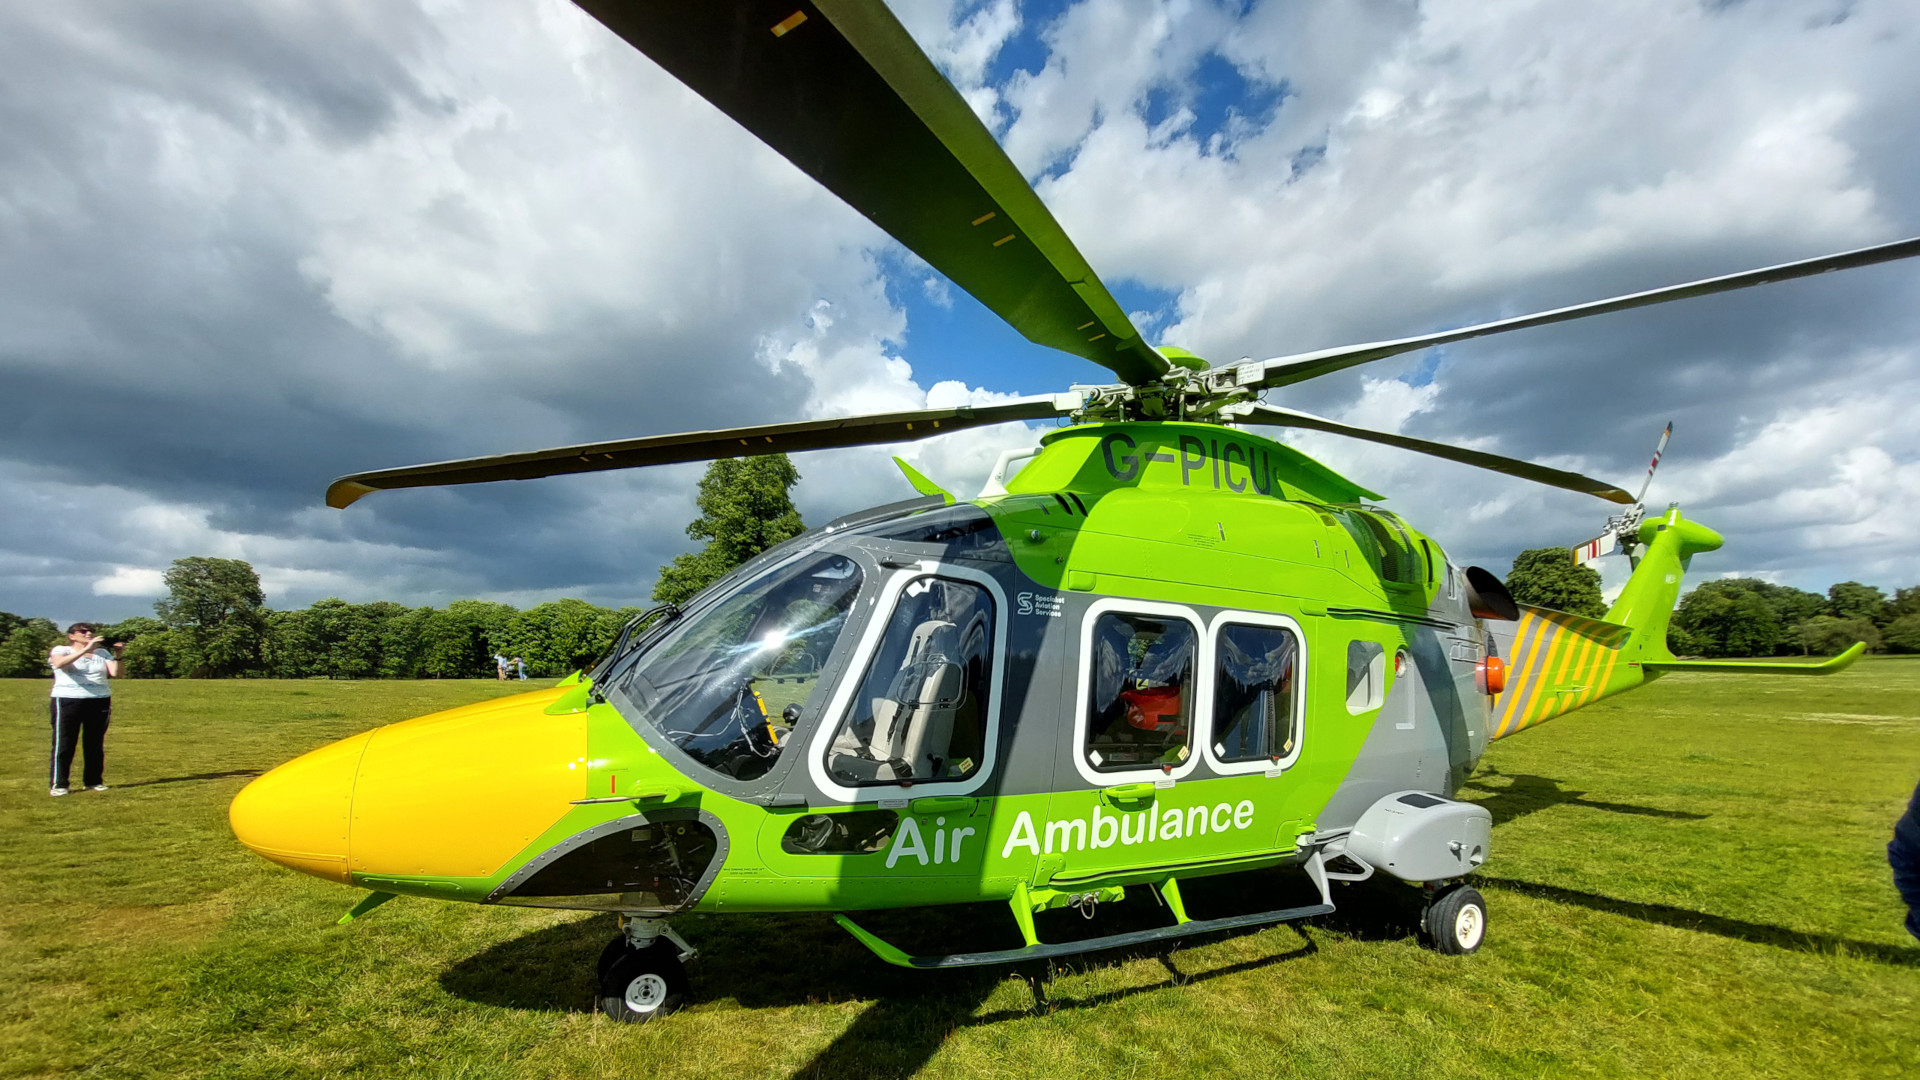 EHAAT,AW169 helicopter,Essex,Herts,Air Ambulance,Green,yellow,sky,skies,June 2022,July 2022